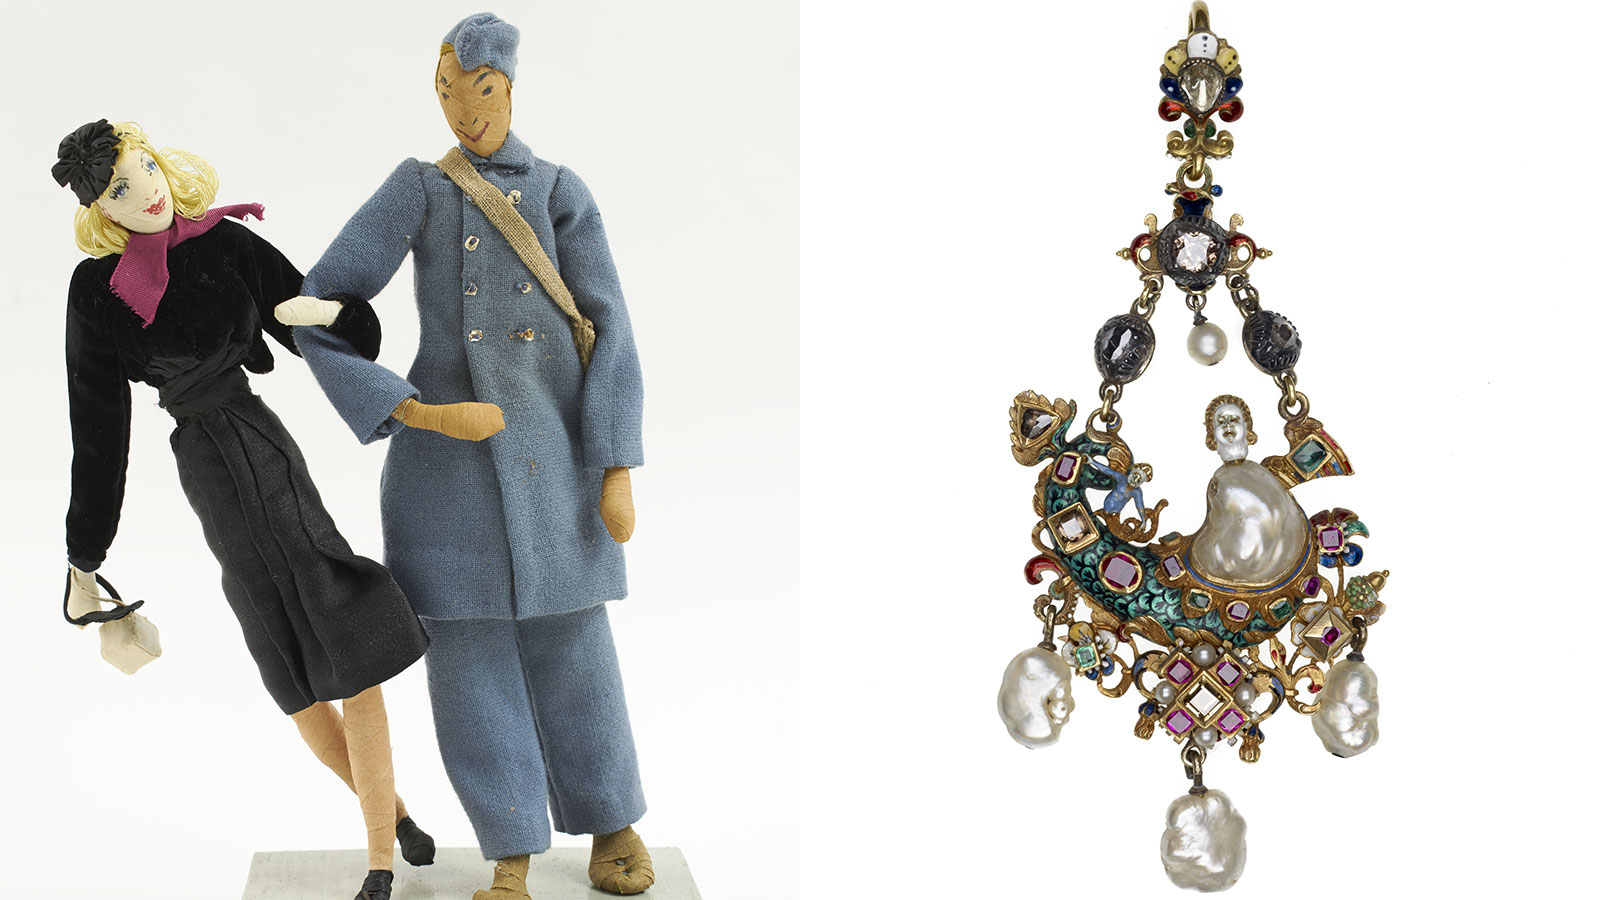 1940s dolls, WWII and pendant was made for Queen Victoria